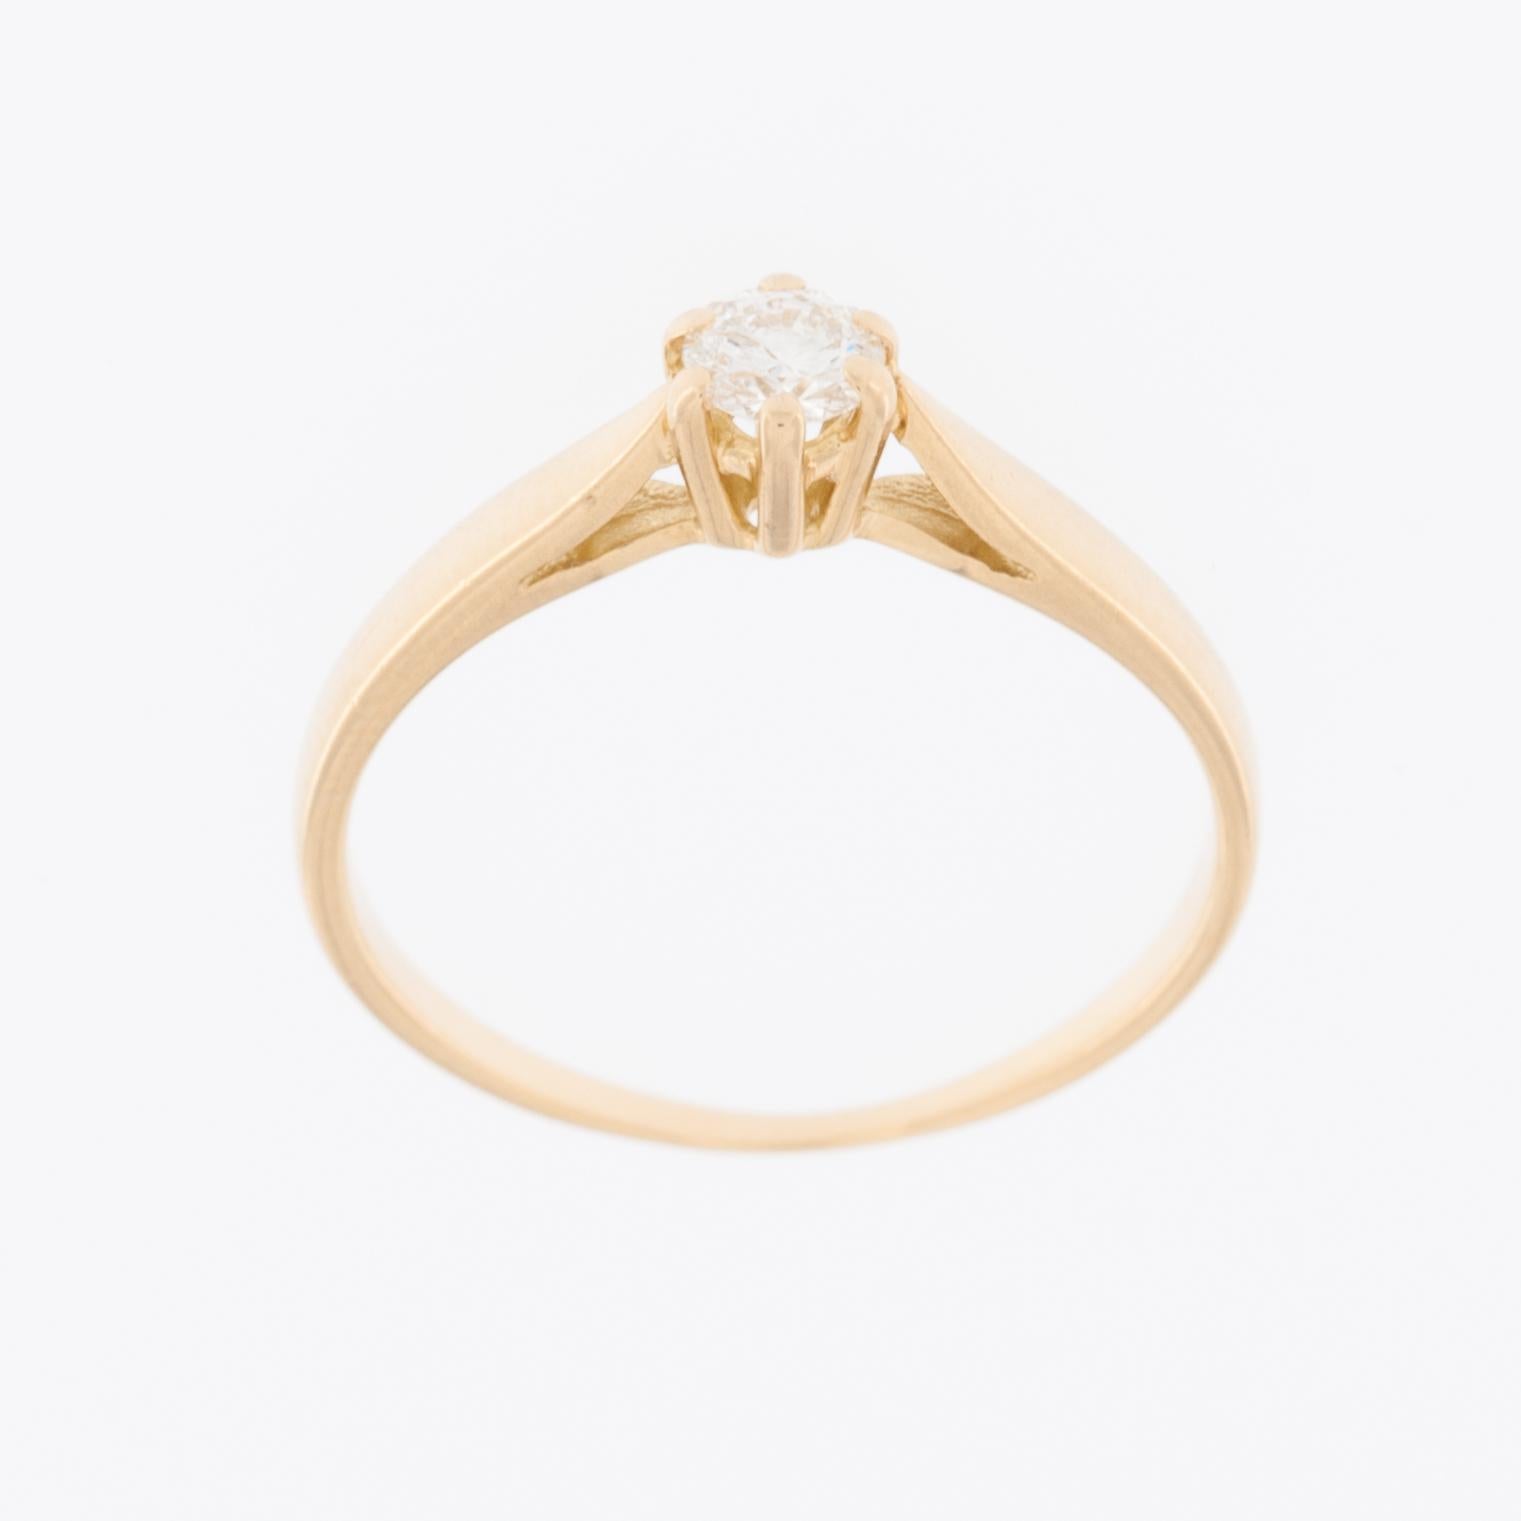 The Solitaire Engagement Ring in 18kt Yellow Gold with Diamond is a classic and timeless piece of jewelry designed for engagements. 

The ring is crafted from high-quality 18-karat yellow gold, known for its warm and lustrous appearance. This